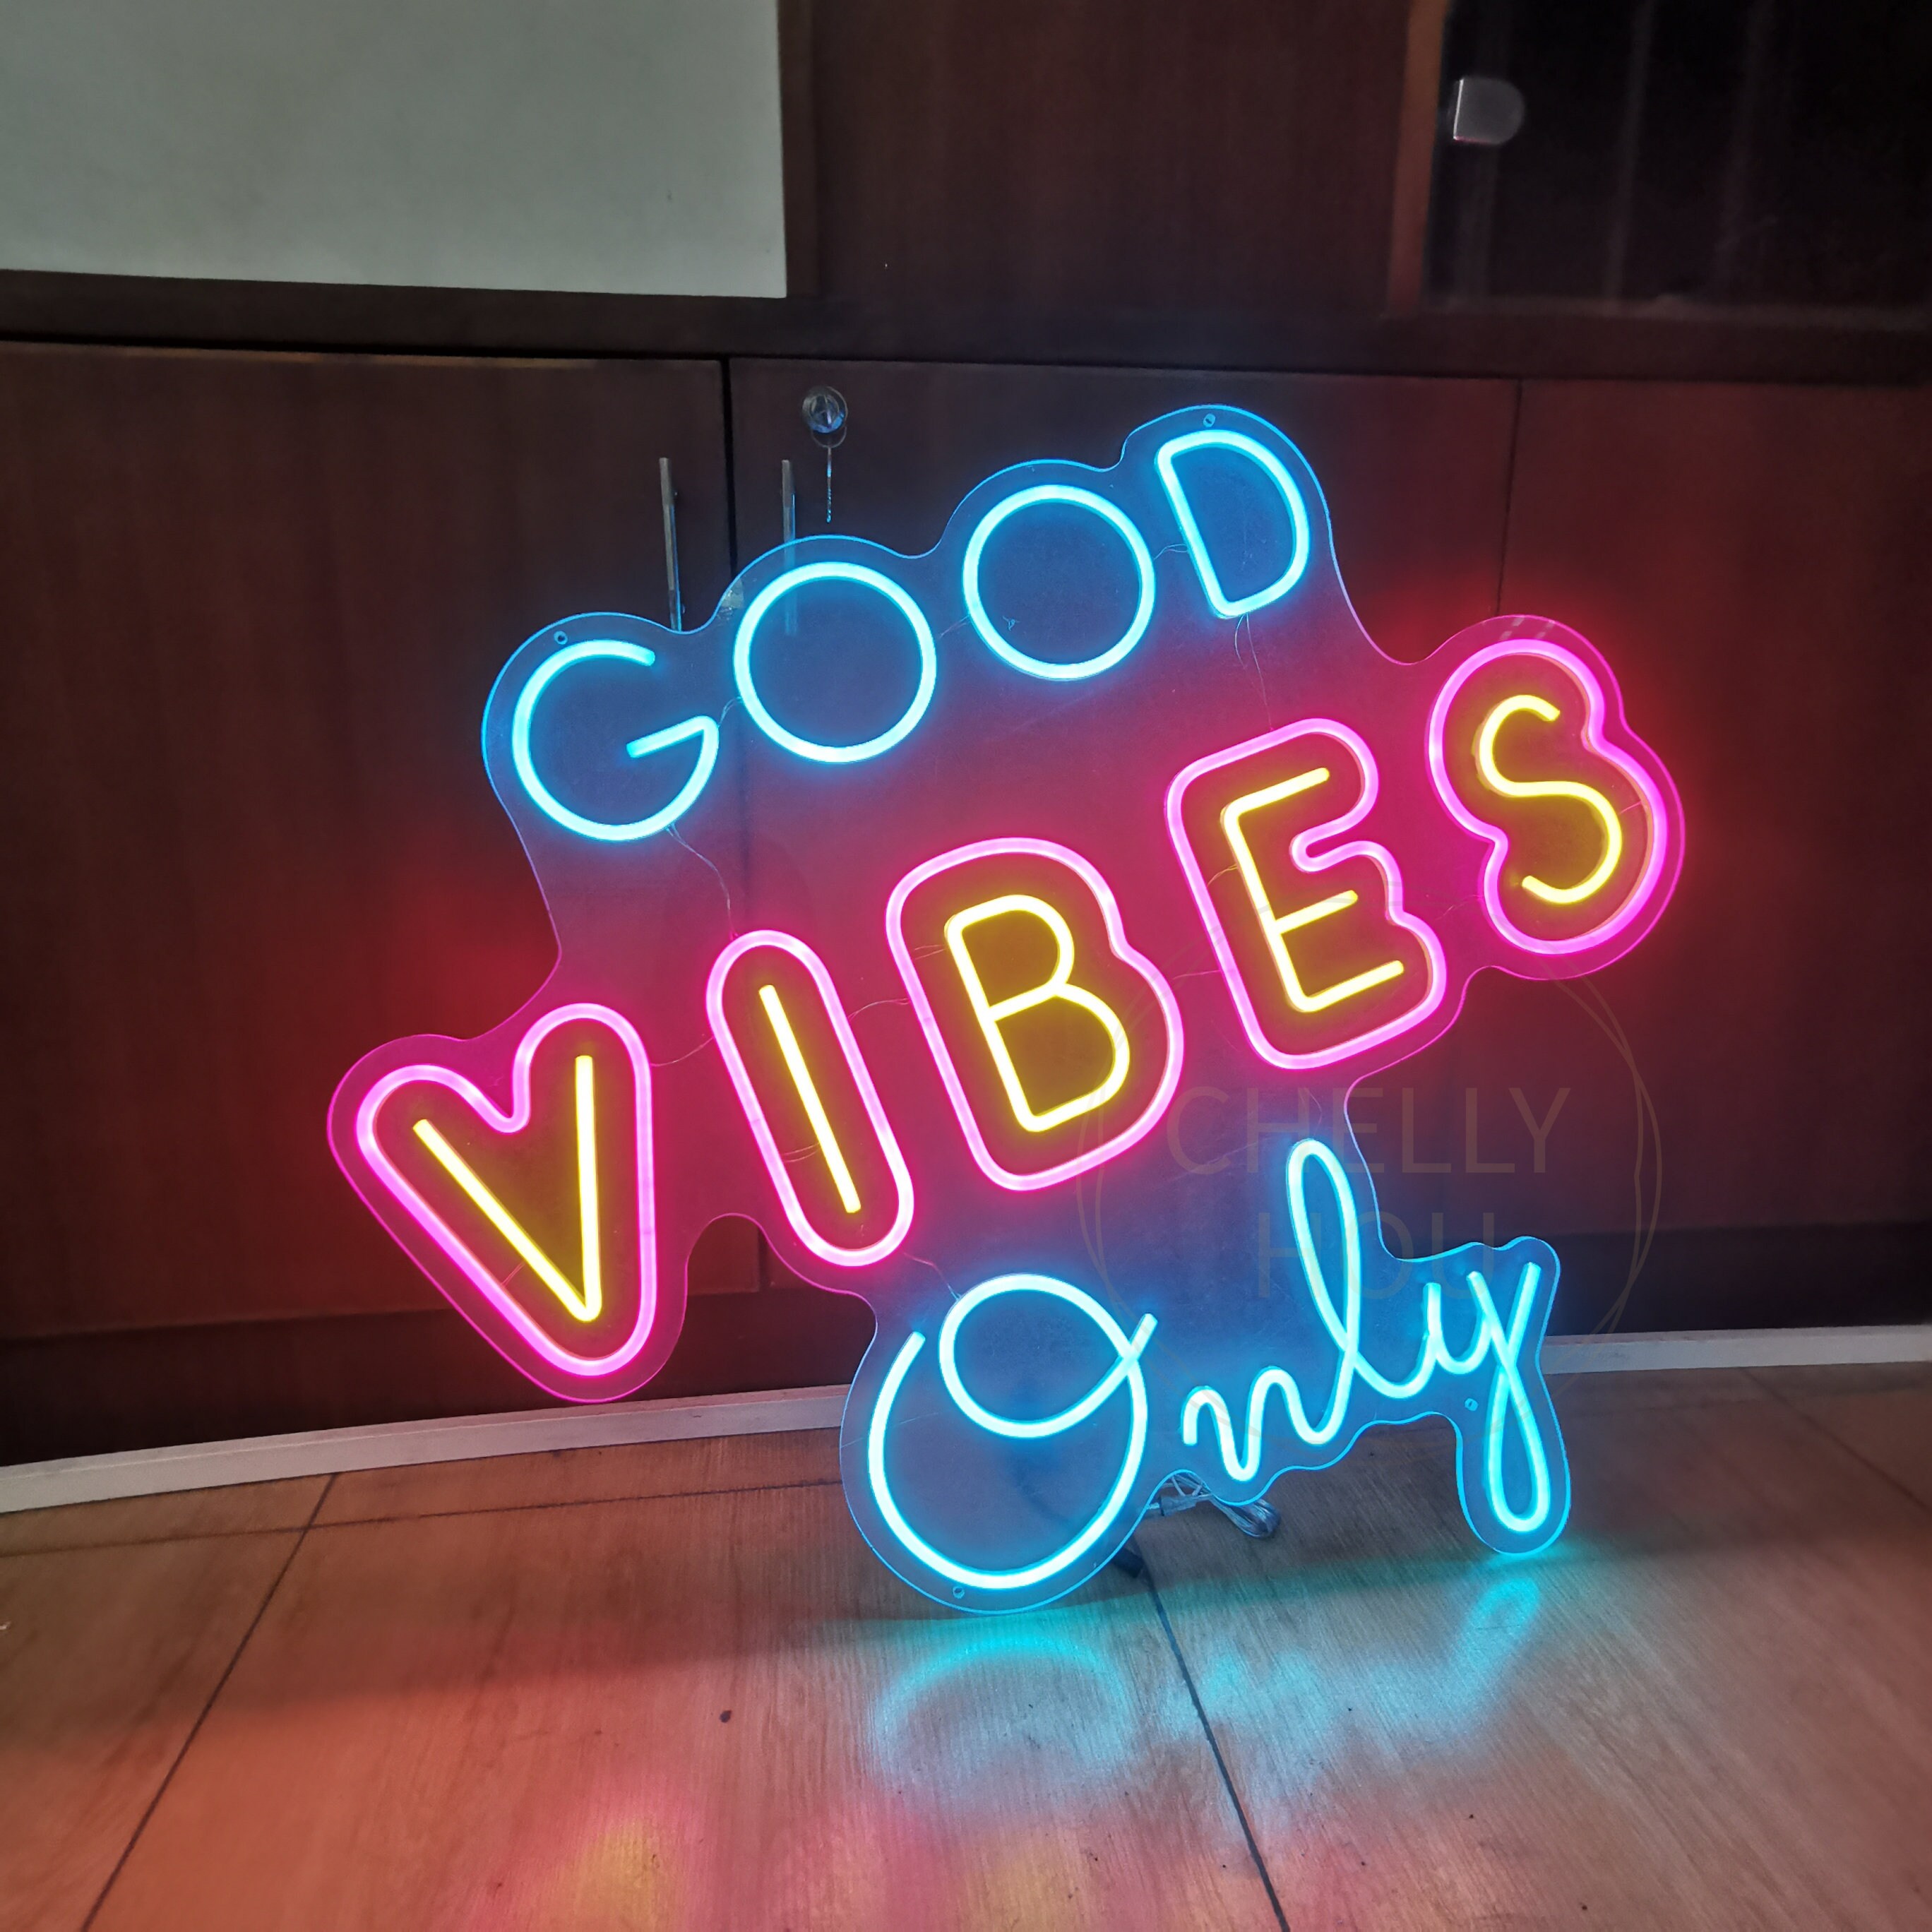 Details about   Hand Craft LED Neon Sign 'Good Vibes Only' Super Bright 12vDC Made in USA 24x24" 